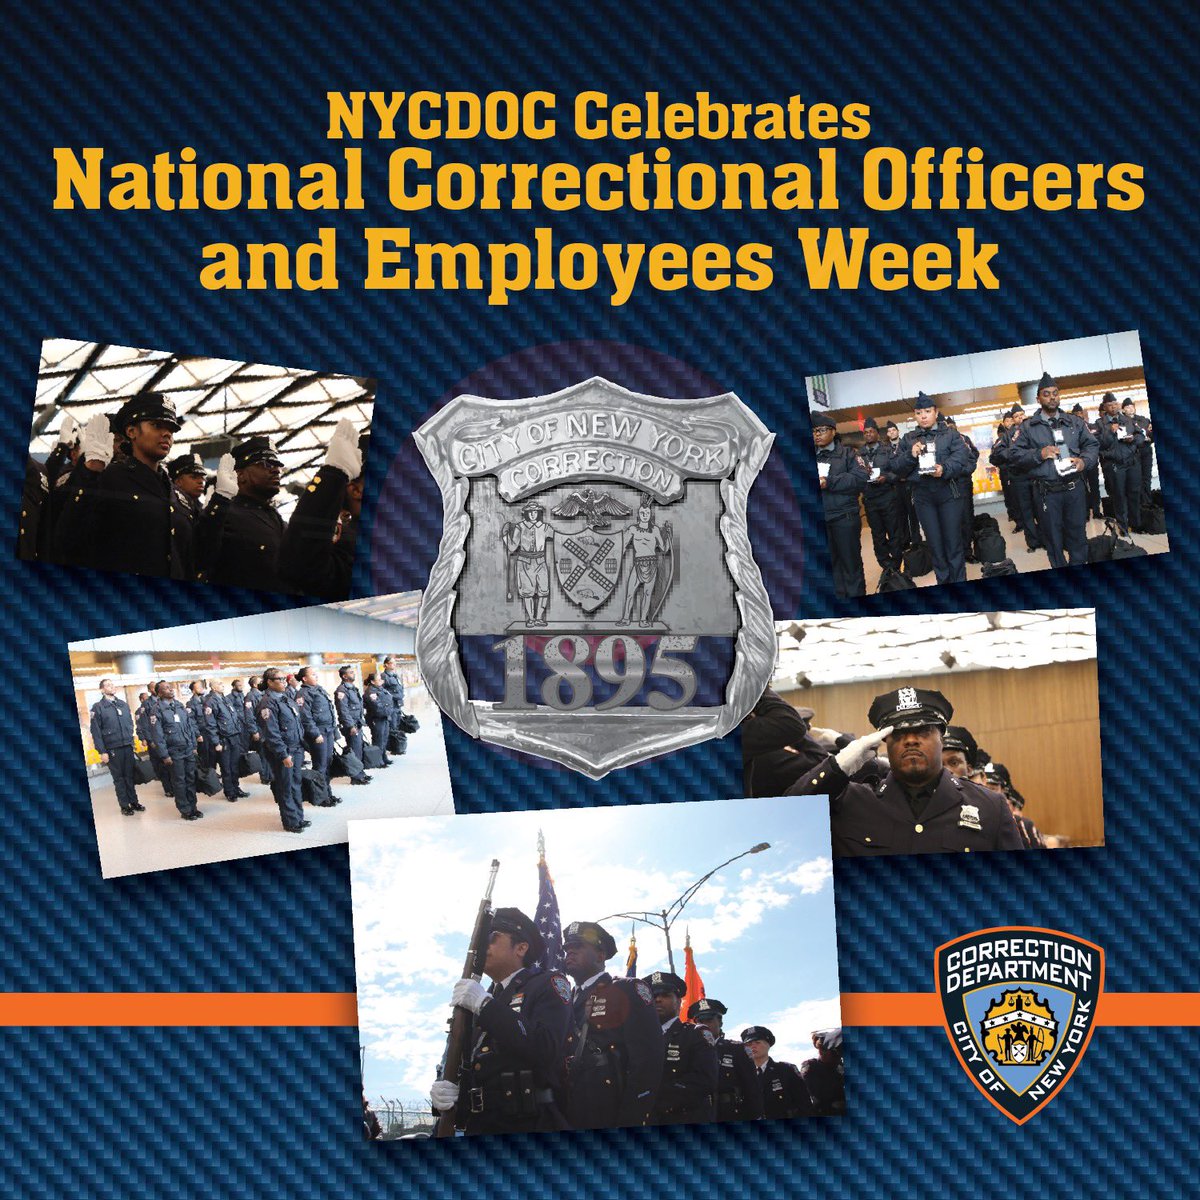 Today marks the start of National Correctional Officers and Employees Week! Thank you to the BOLD men and women of @CorrectionNYC for your service to our city. We look forward to celebrating your dedication and service all week long.